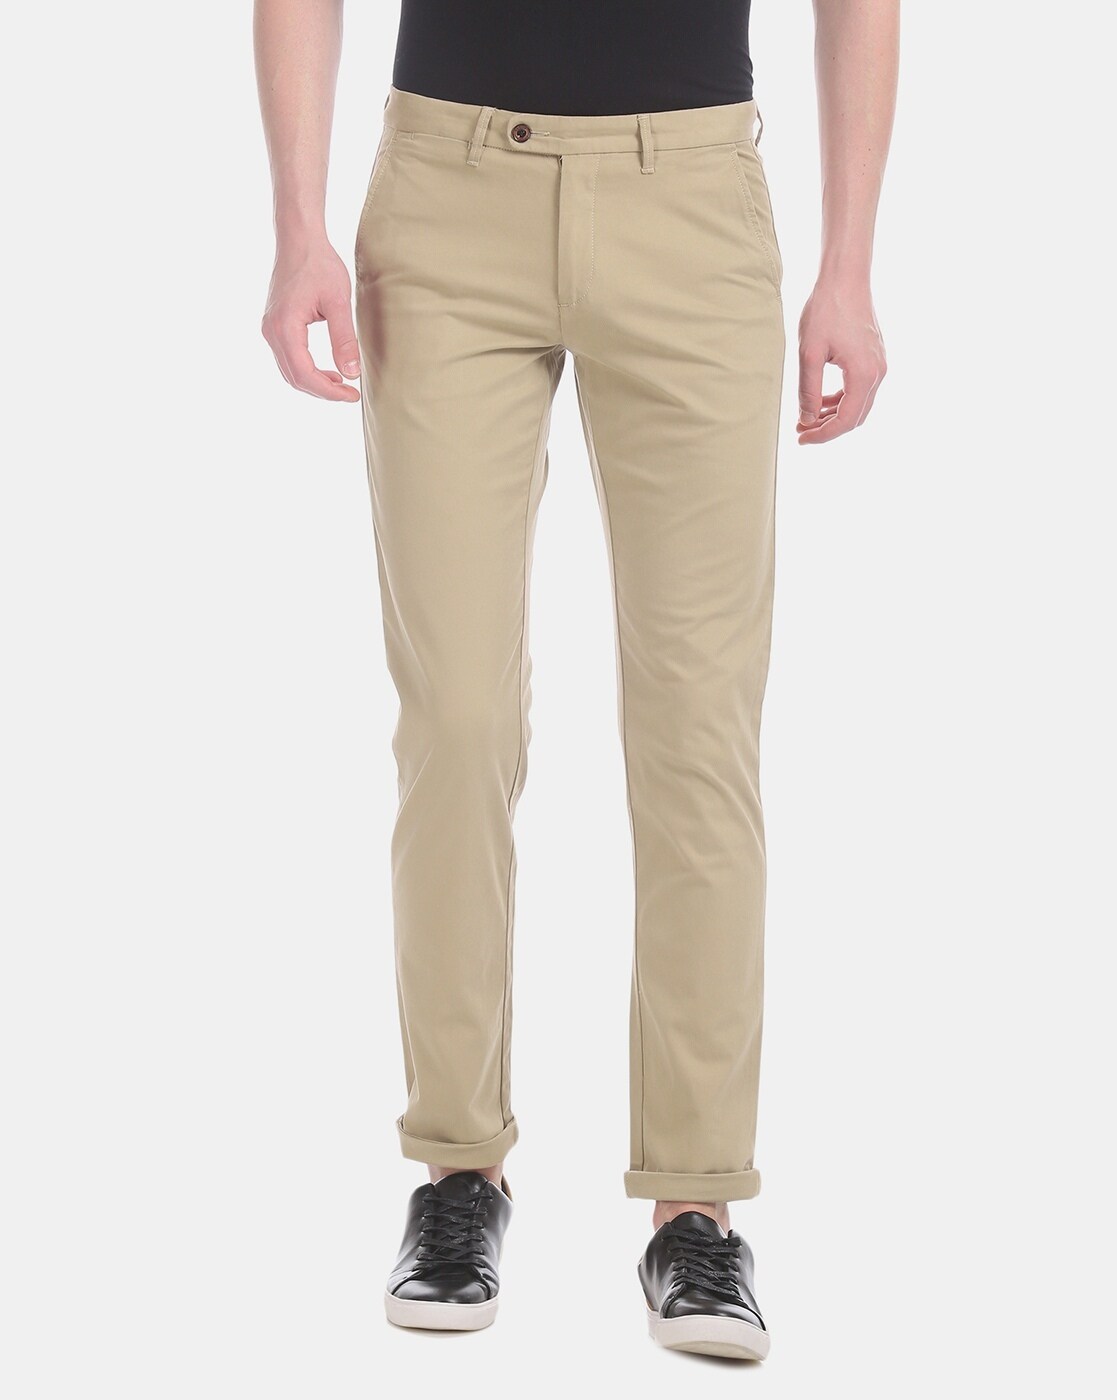 Chinos Regular Fit Men Formal Trousers, Machine wash at Rs 550 in Delhi